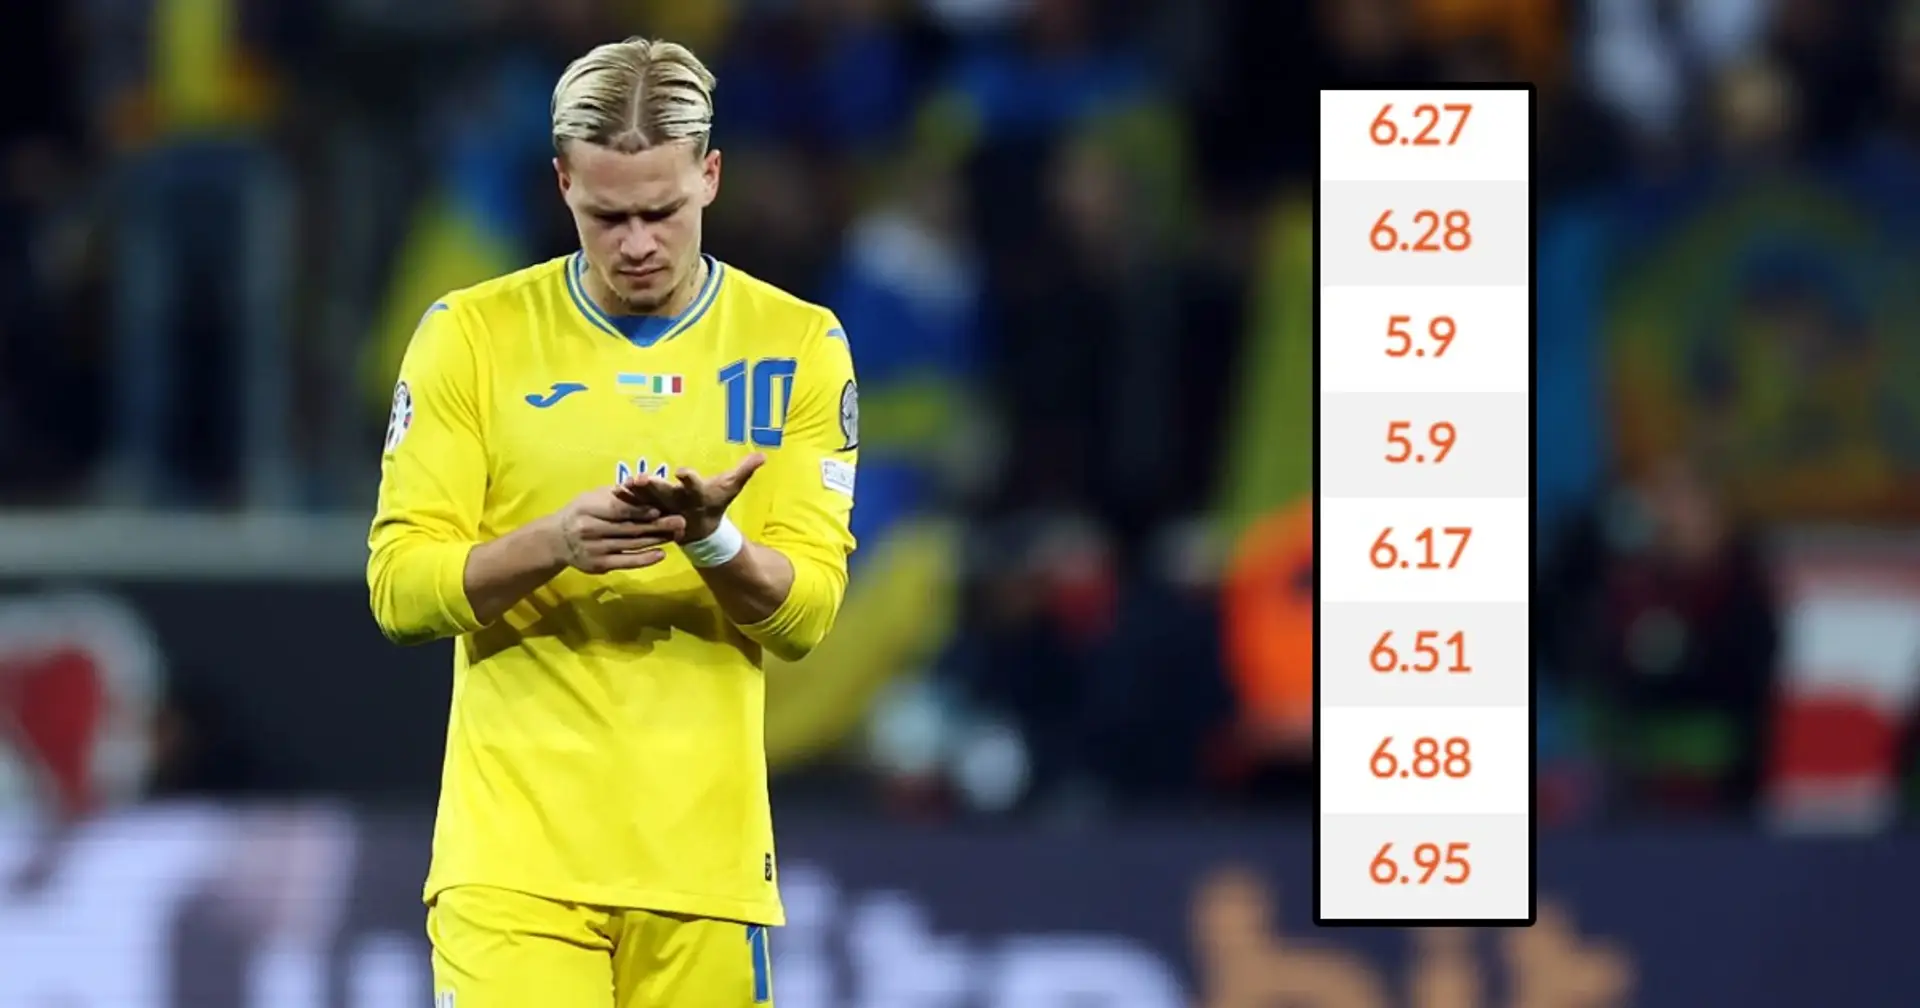 Is Mudryk really so much better with Ukraine than Chelsea as Shakhtar boss claims?